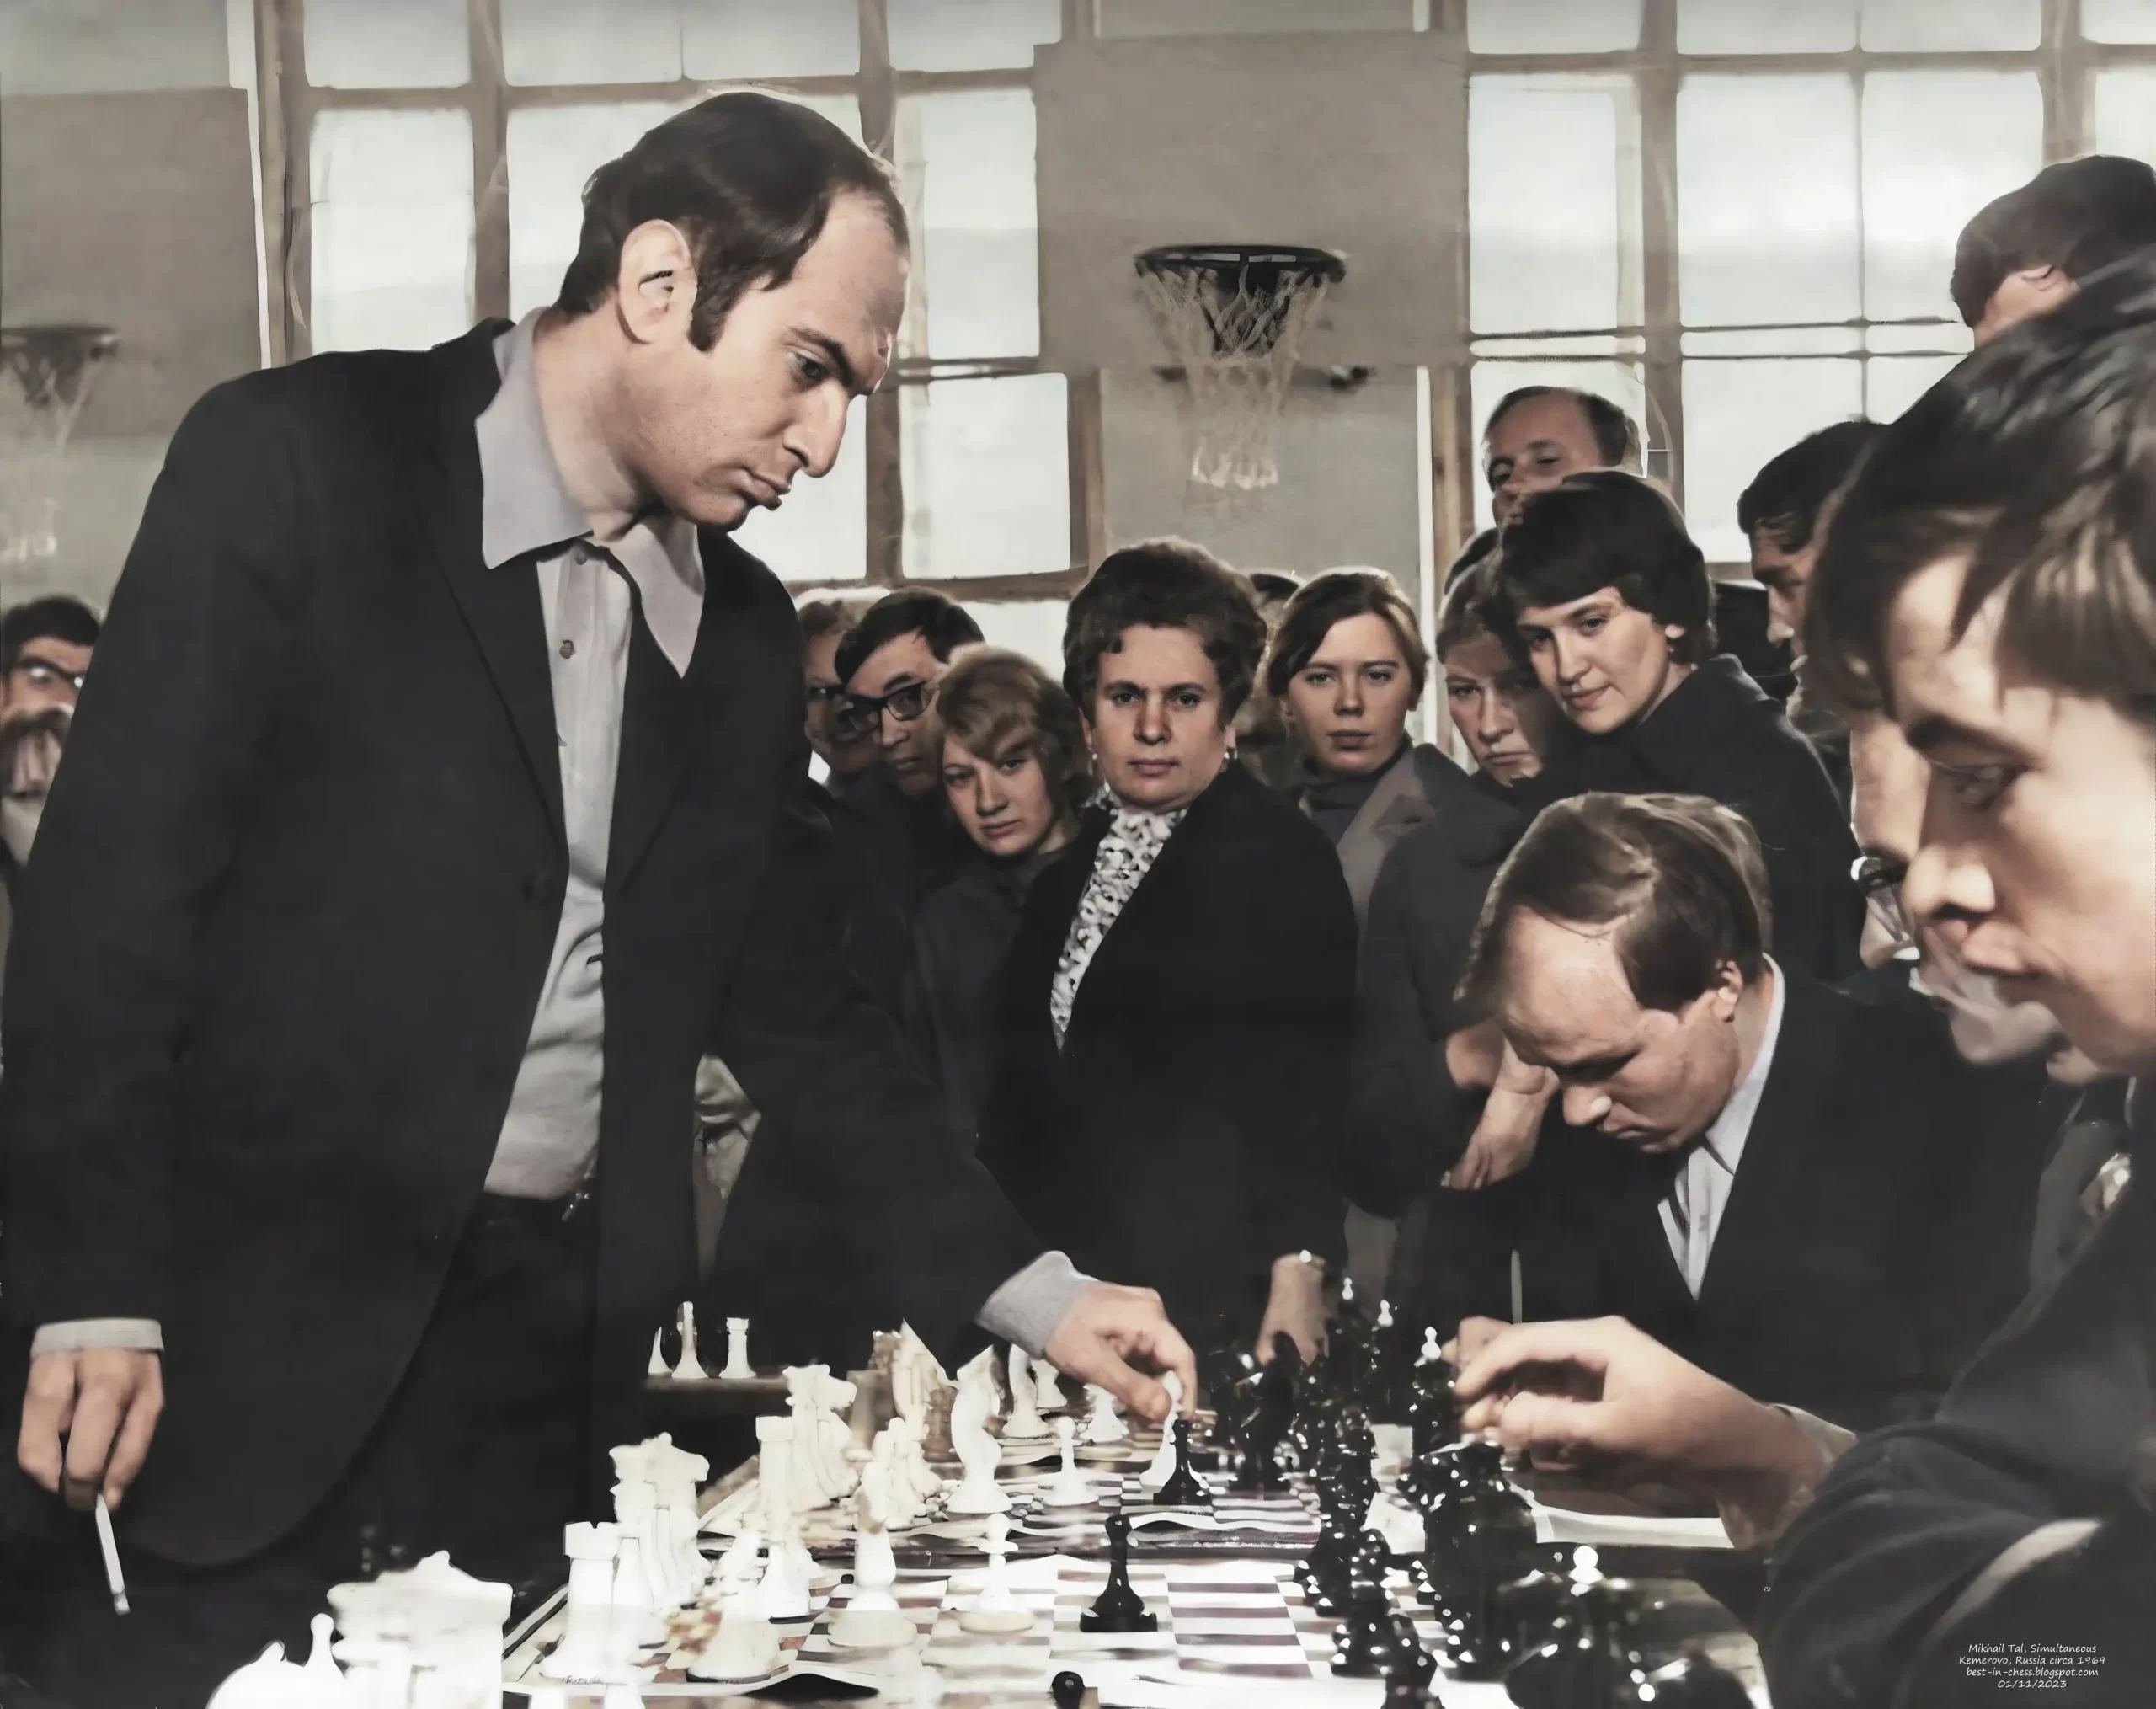 Mikhail Tal - The magician from Riga. Best attacking player ever.